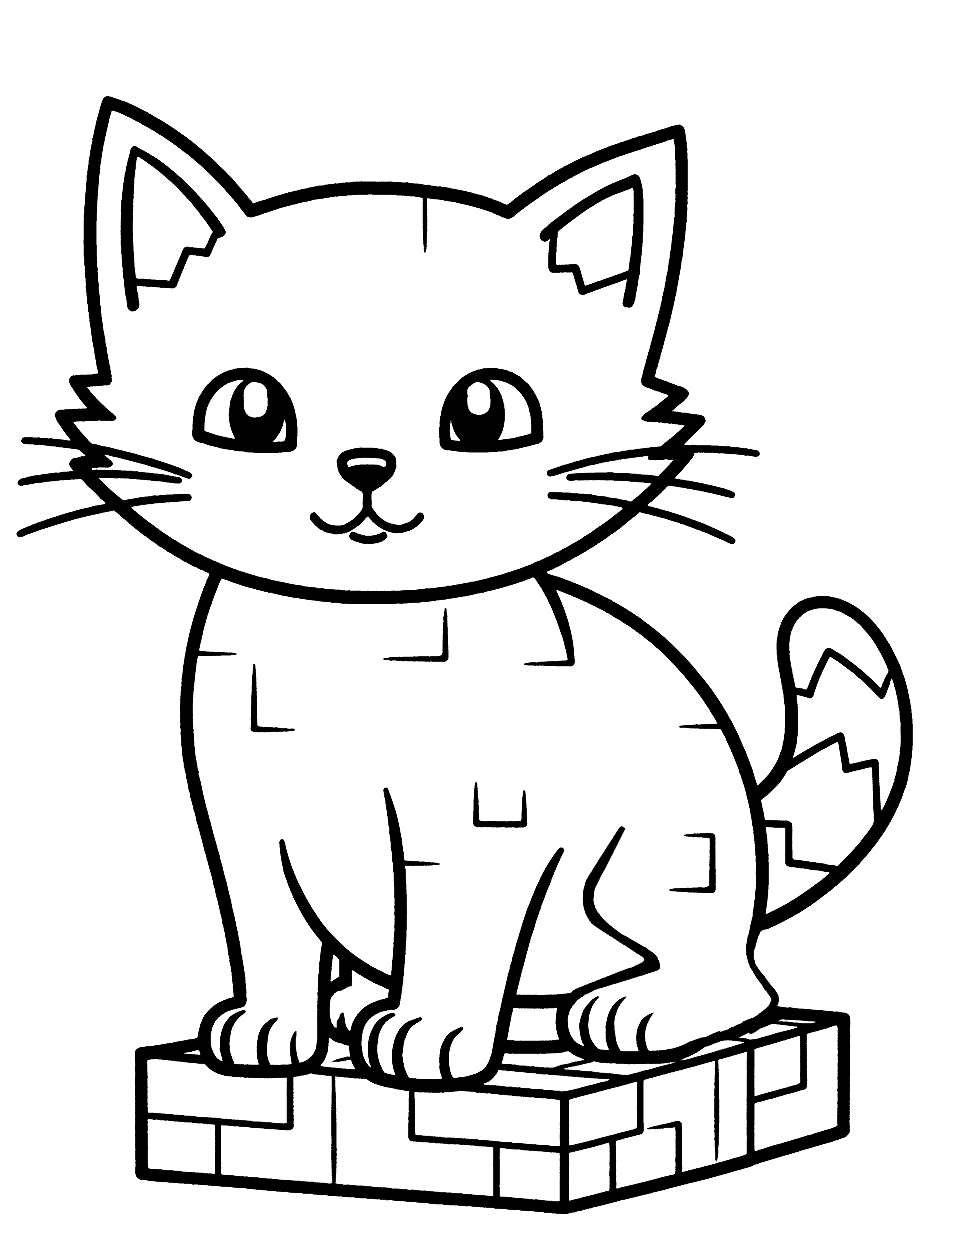 Minecraft-Inspired Blocky Cat Coloring Page - A Minecraft-inspired cat composed entirely of squares and rectangles for that pixelated look.